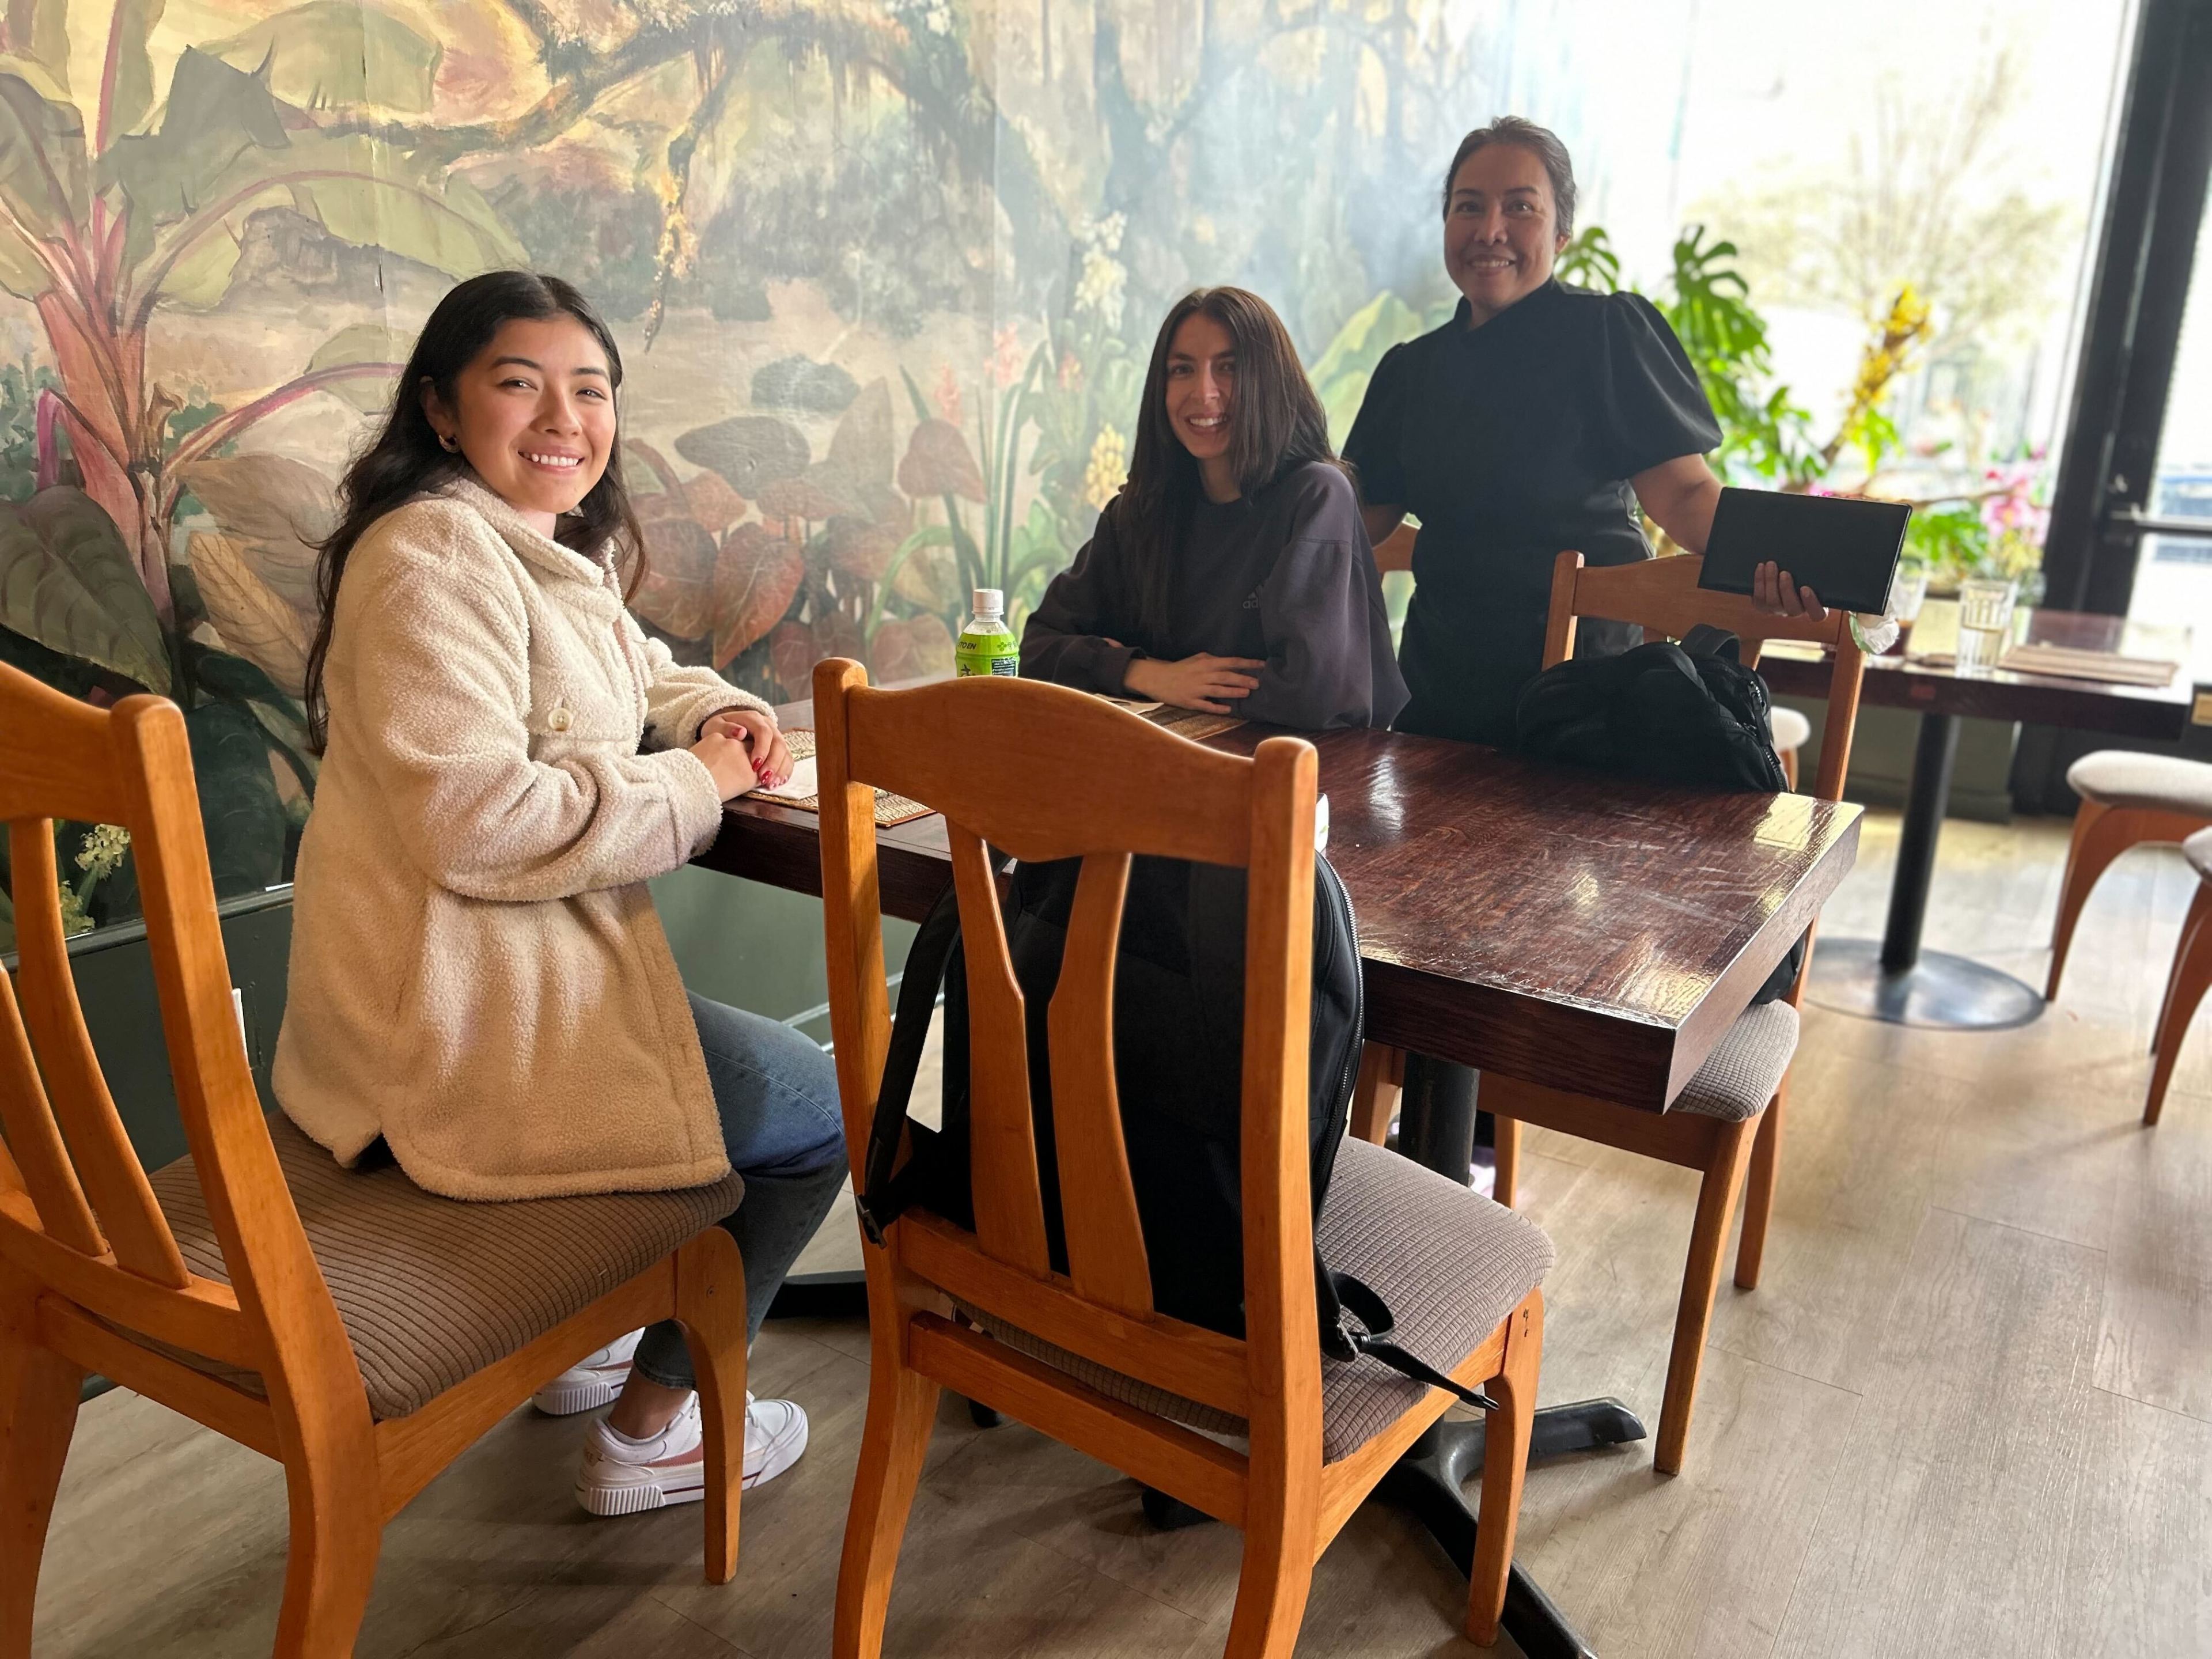 Three happy people are seated at a wooden table in a cozy café with a mural behind them.